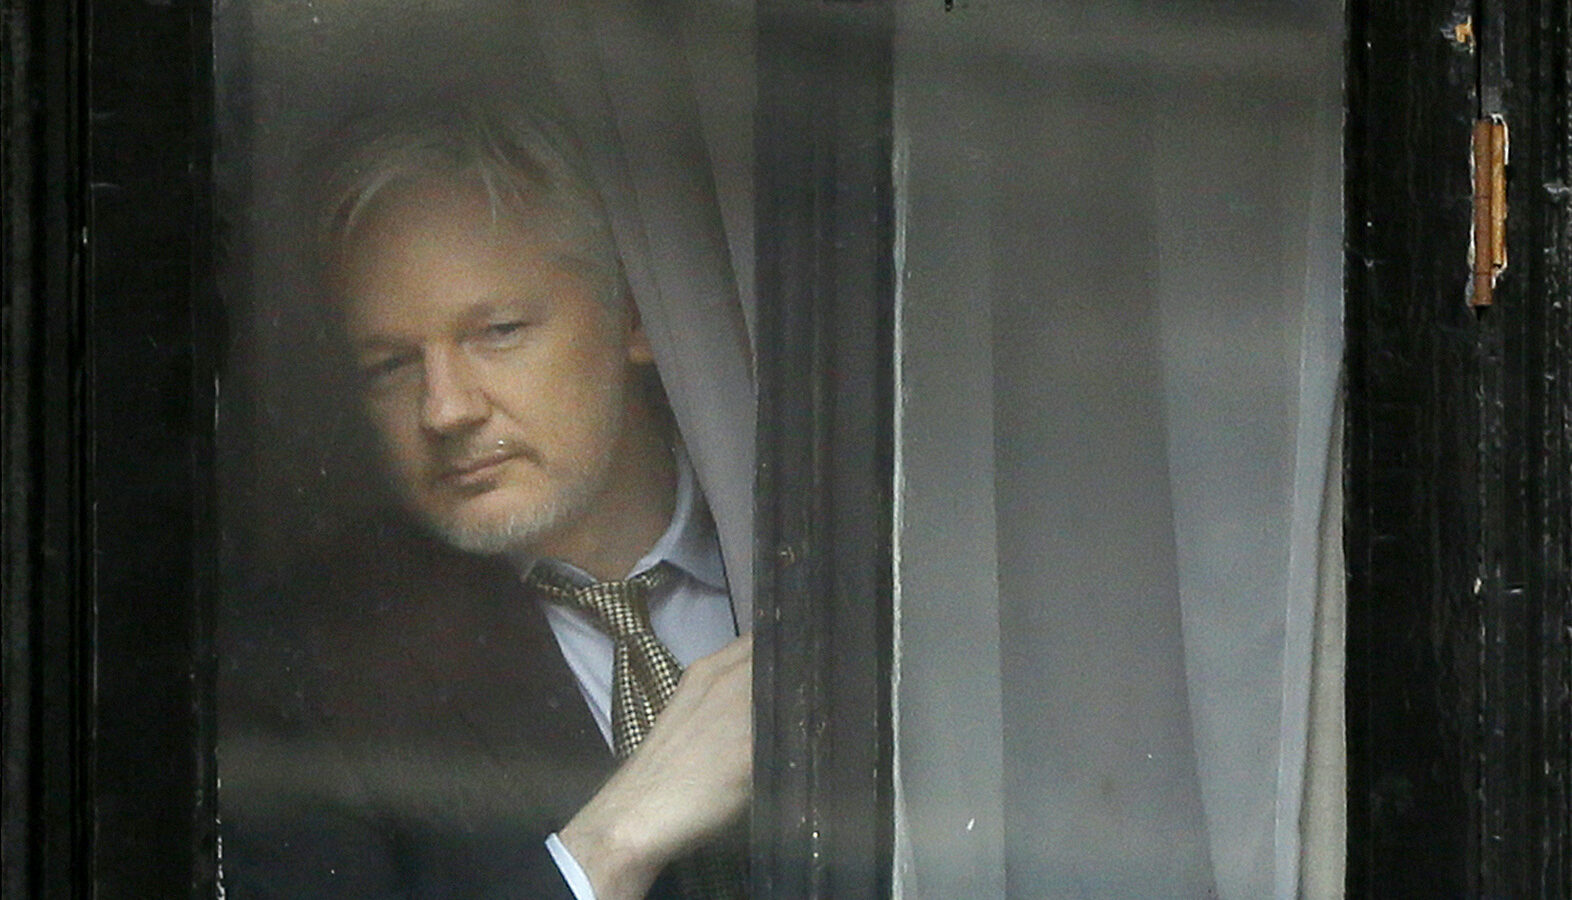 Wikileaks founder Julian Assange appears at the window before speaking on the balcony of the Ecuadorean Embassy in London, Friday, Feb. 5, 2016.